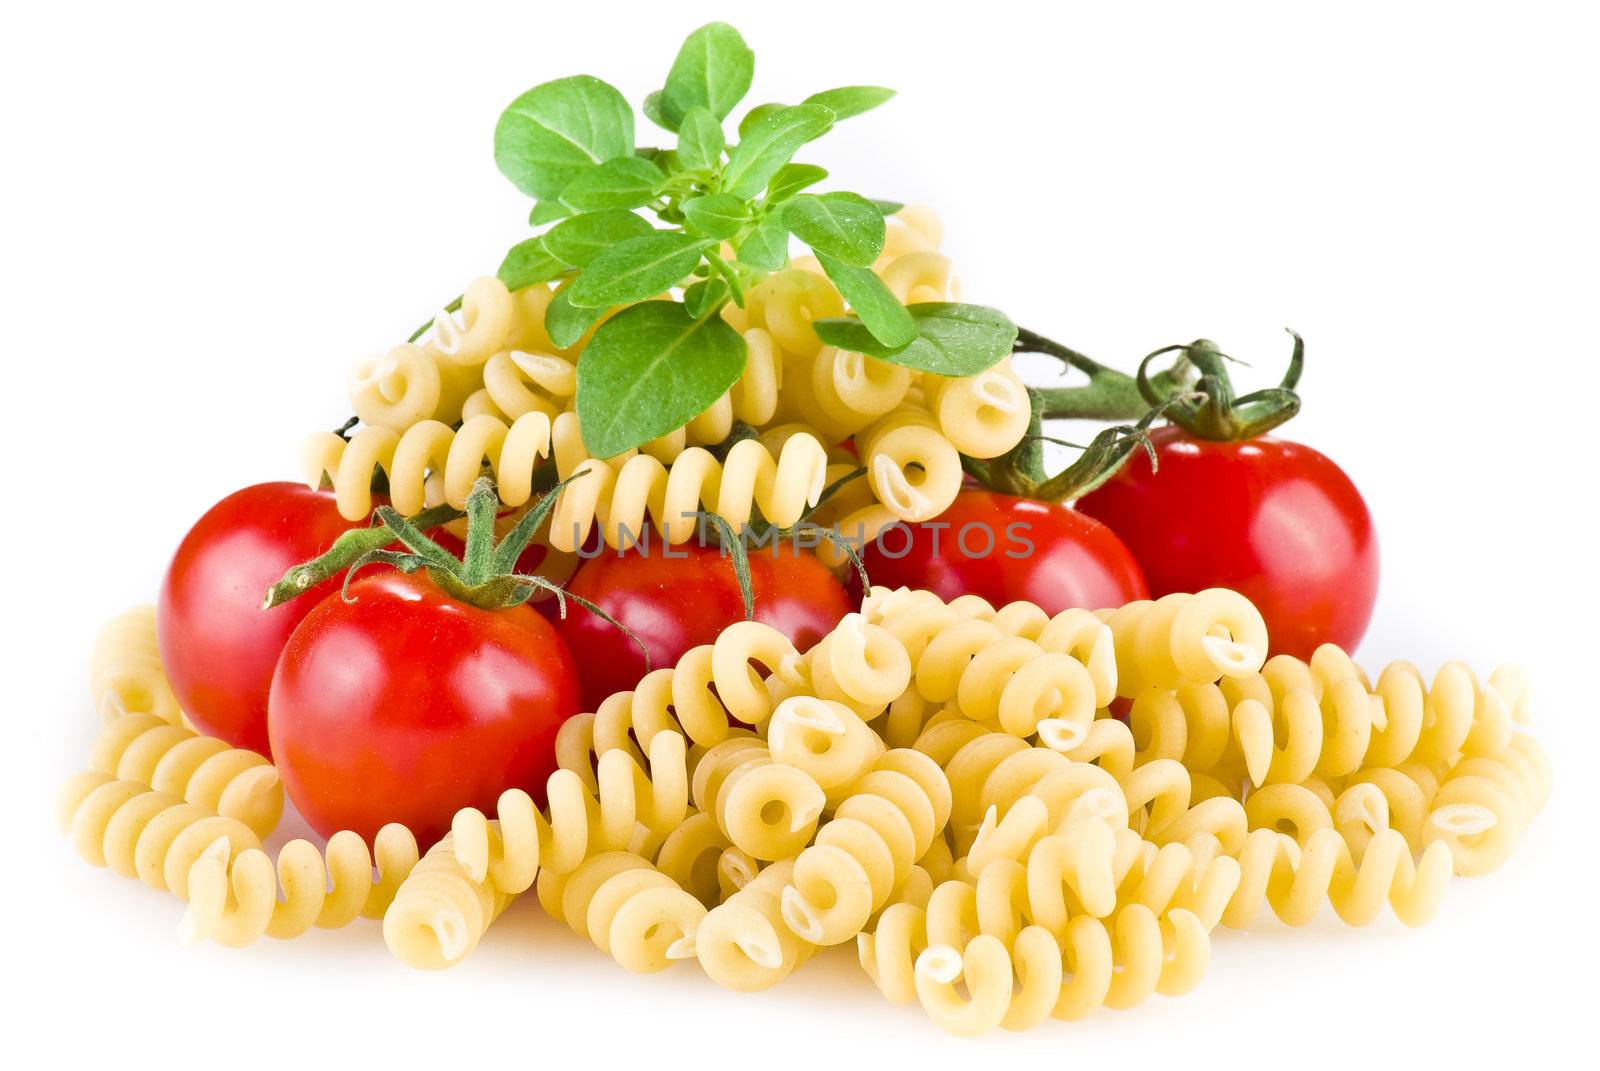 Fusilli pasta with tomatoes and basil over white background